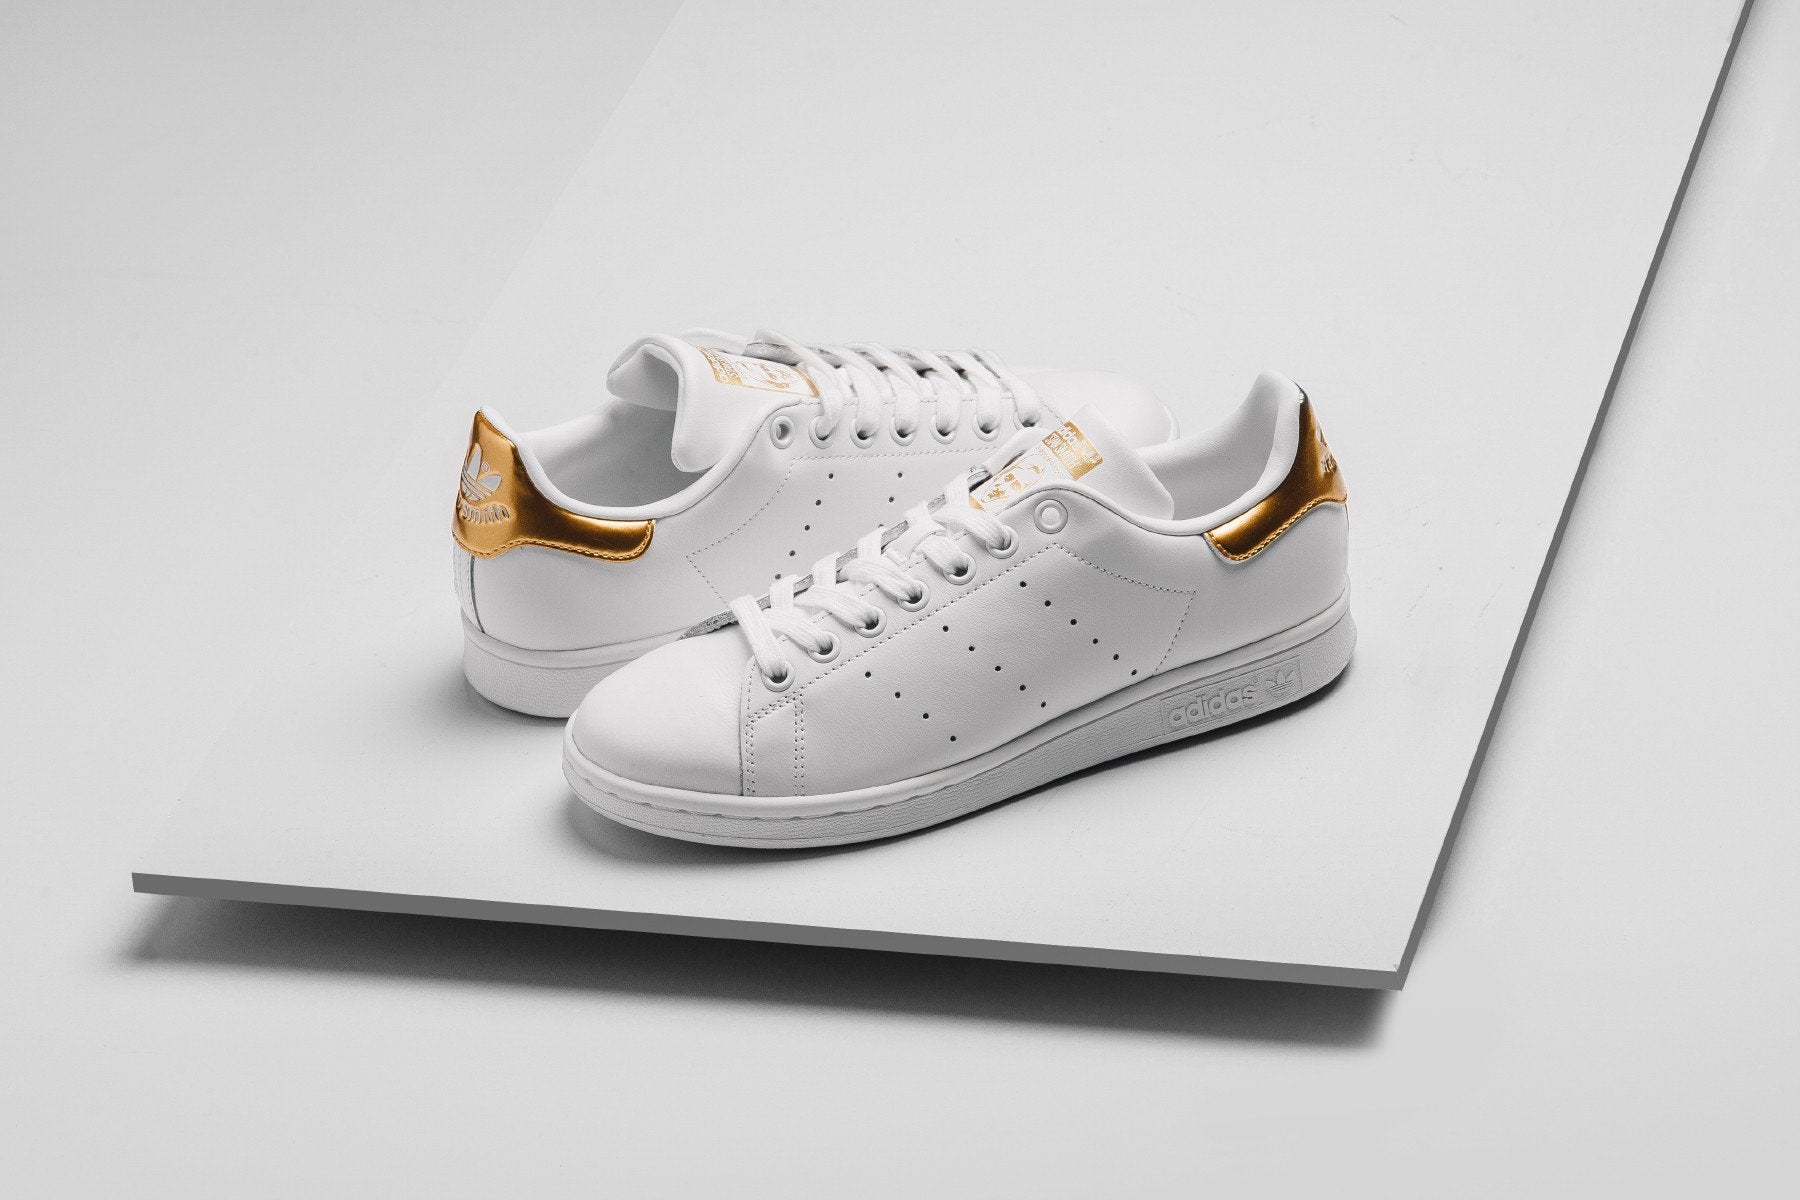 hed forræderi Gå ned Adidas Originals Women's Stan Smith In Running White/Metallic Gold Ava –  Feature